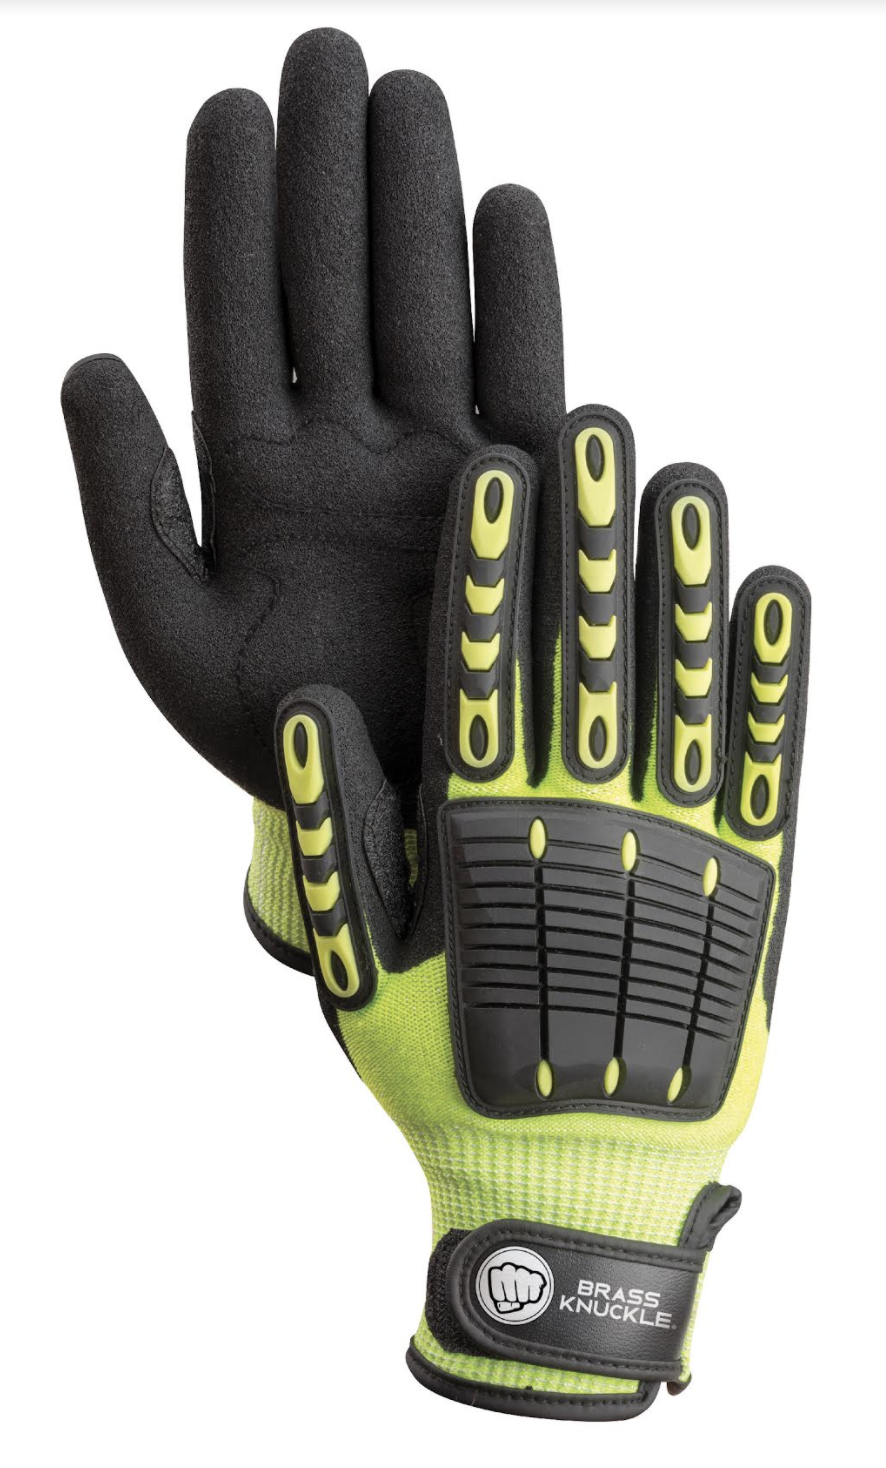 New Safety Glove Designed for Impact Resistance - Roofing